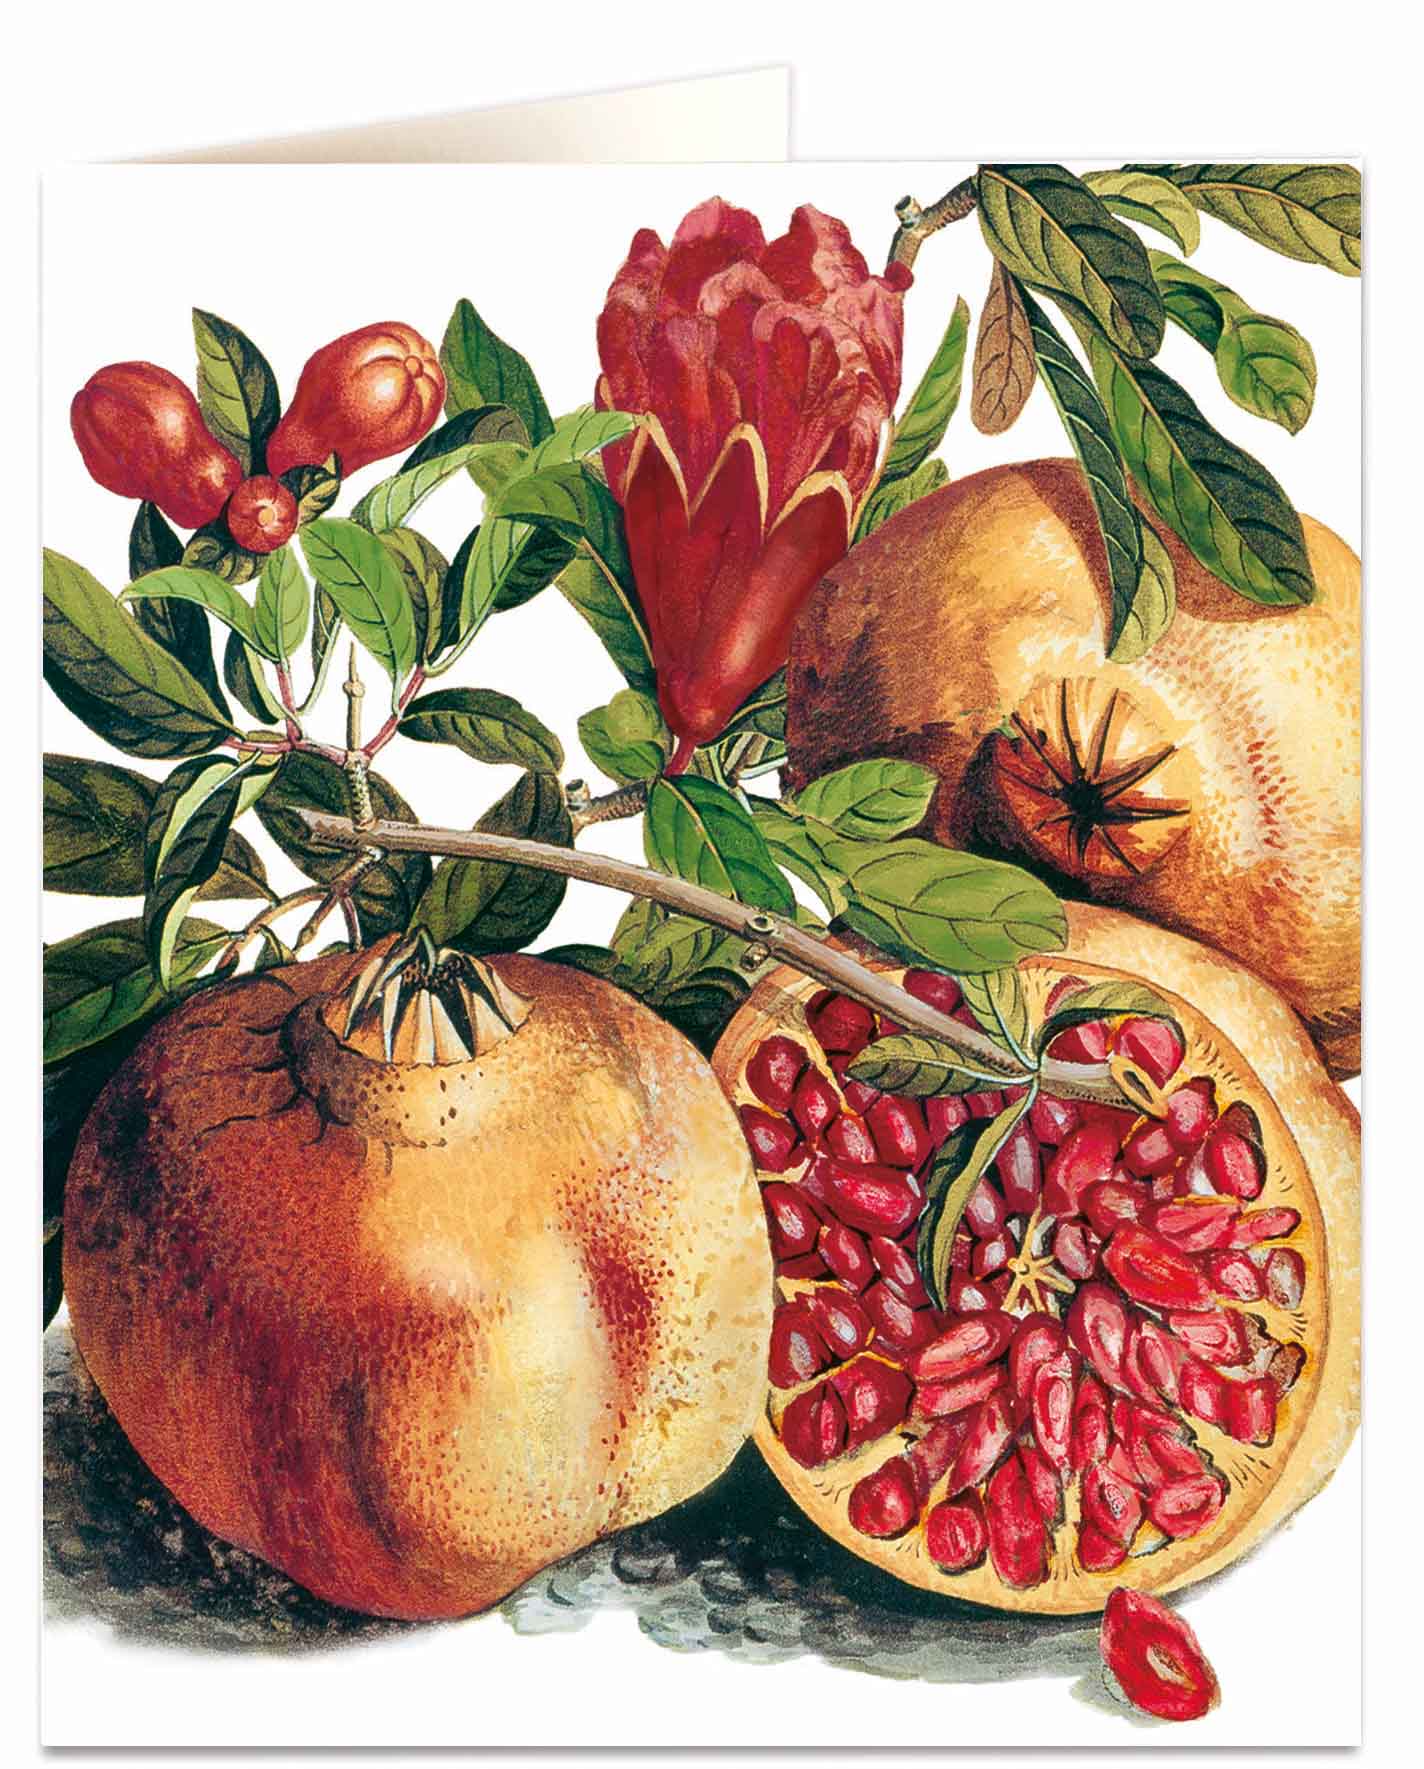 Pomegranate - Natural History Museum - Natural History Museum - from Archivist Gallery 